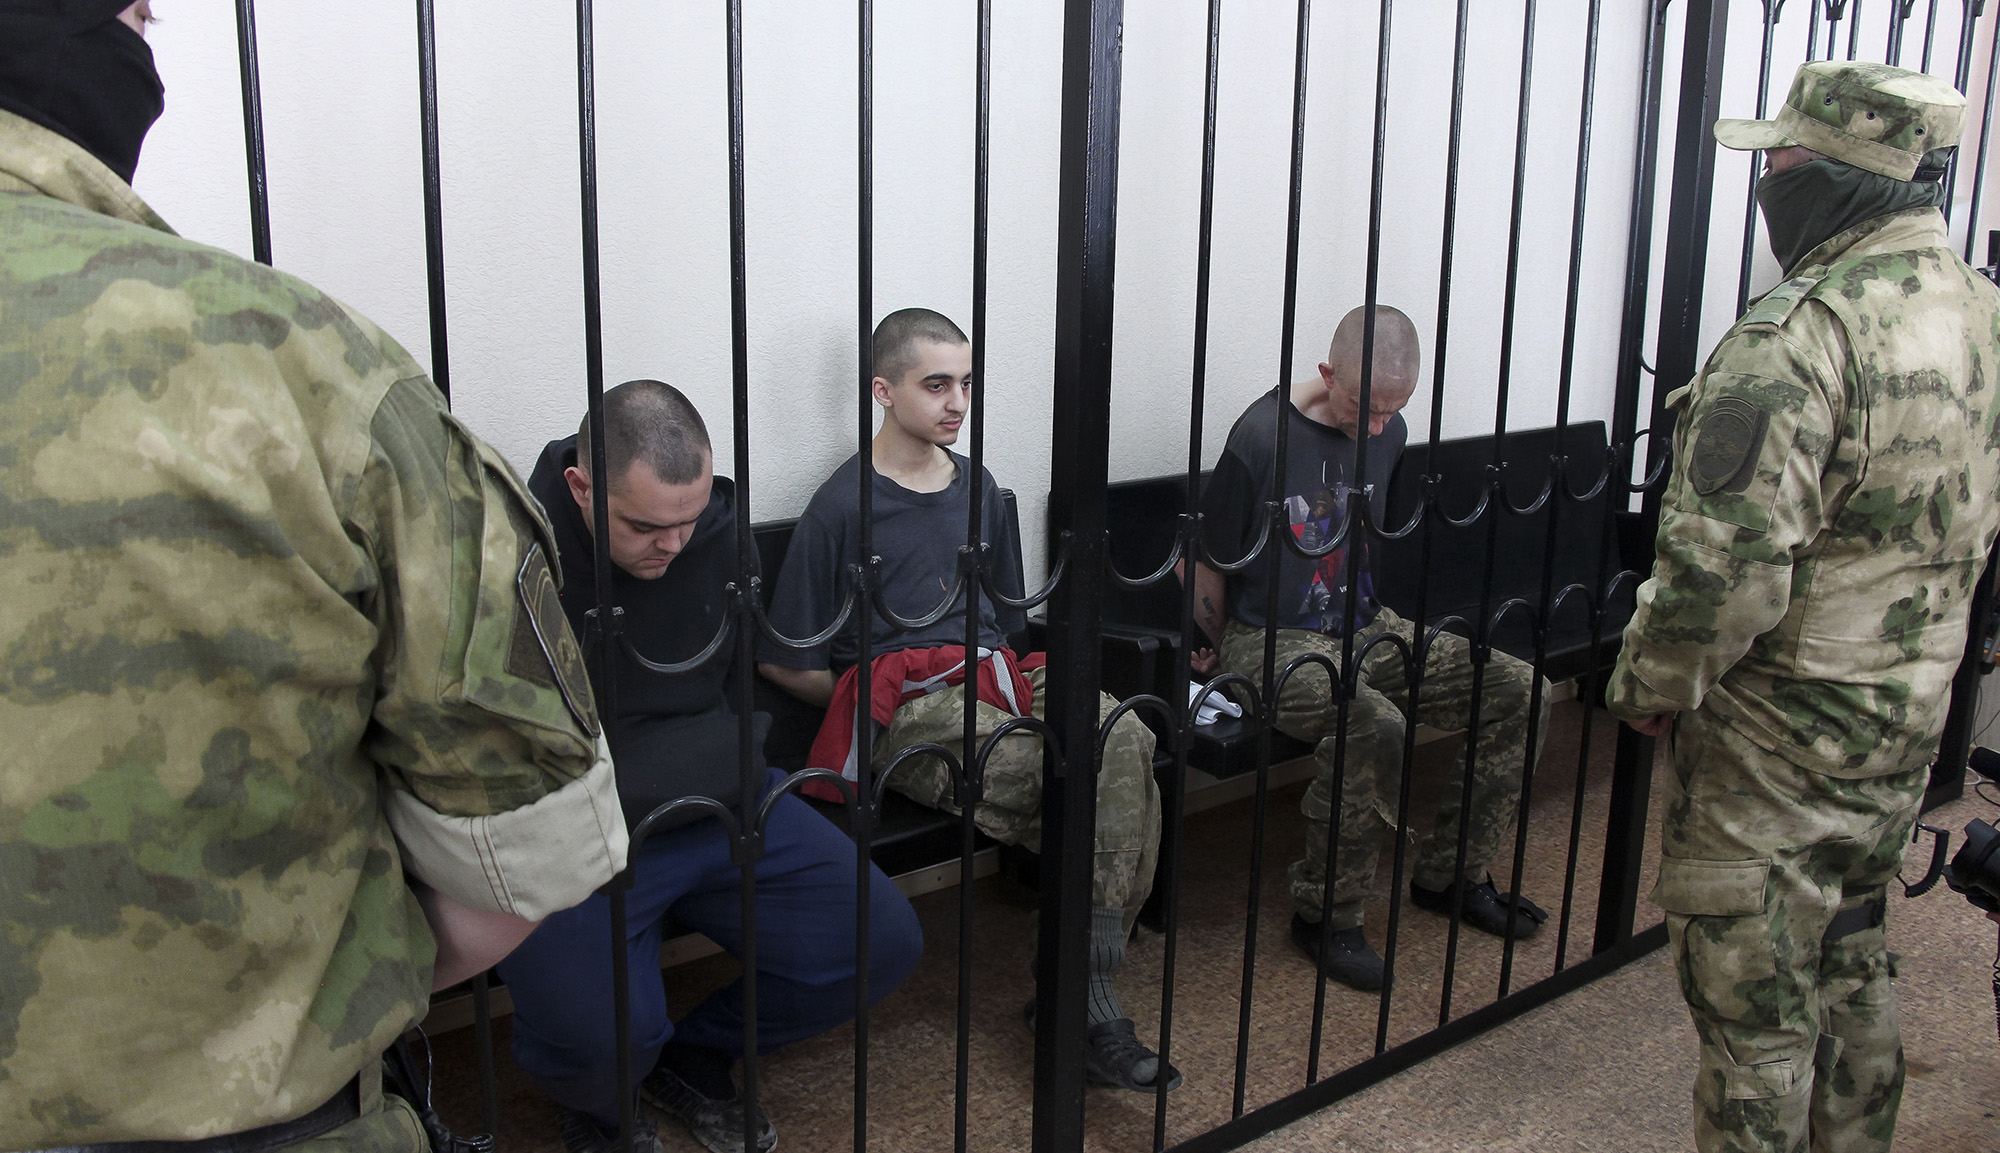 Two British citizens Aiden Aslin, left, and Shaun Pinner, right, and Moroccan Saaudun Brahim, center, sit behind bars in a courtroom in Donetsk, in the territory which is under the Government of the Donetsk People's Republic control, eastern Ukraine, on June 9.